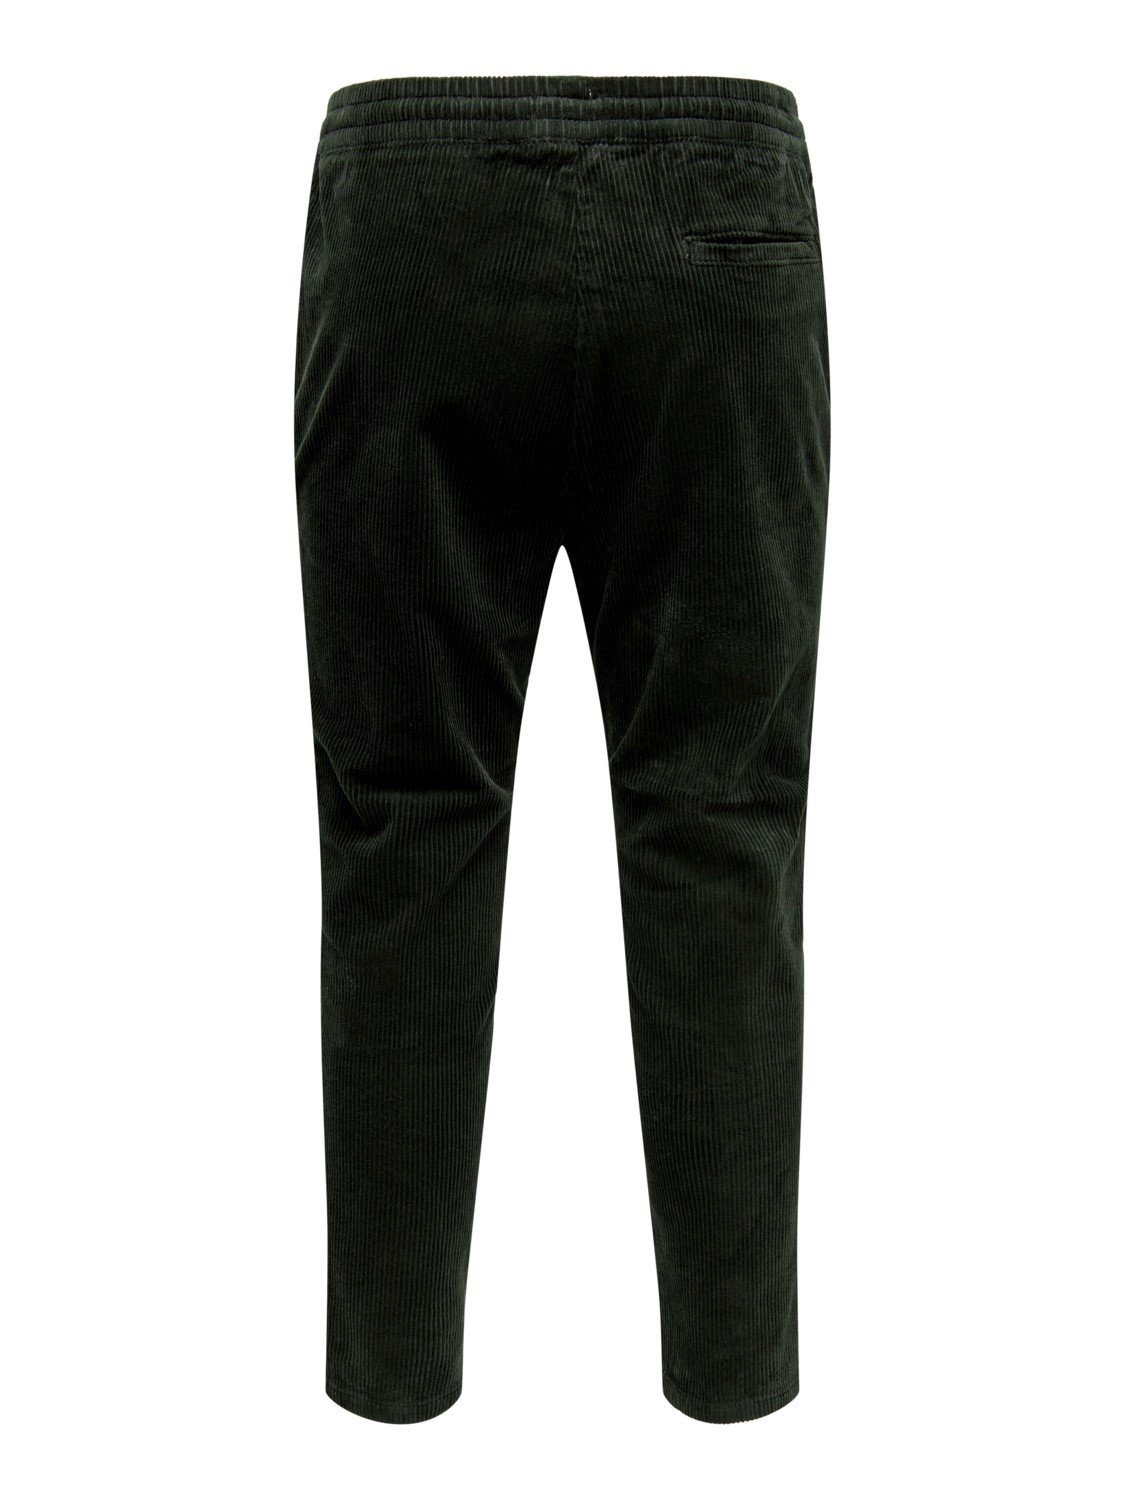 Stoffhose Cropped ONSLINUS Pants Dunkelgrün (1-tlg) Cord ONLY Relaxed in & Bequem SONS Stoffhose 3978 Freizeit